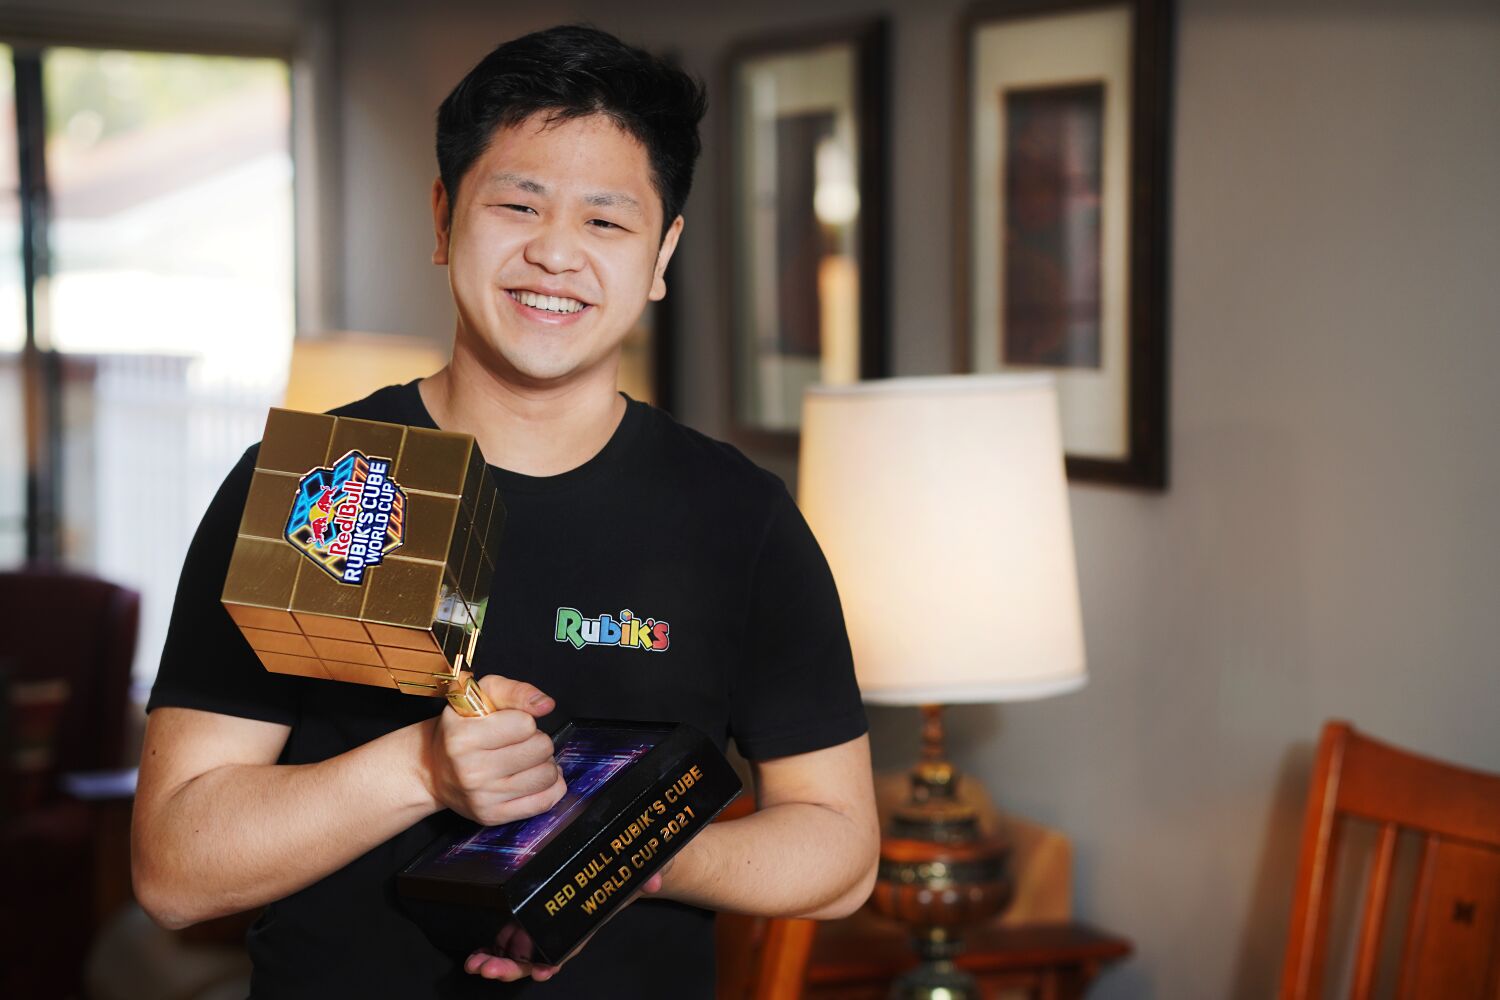 Southern California resident smashes Rubik's Cube world record with 3.13-second solve